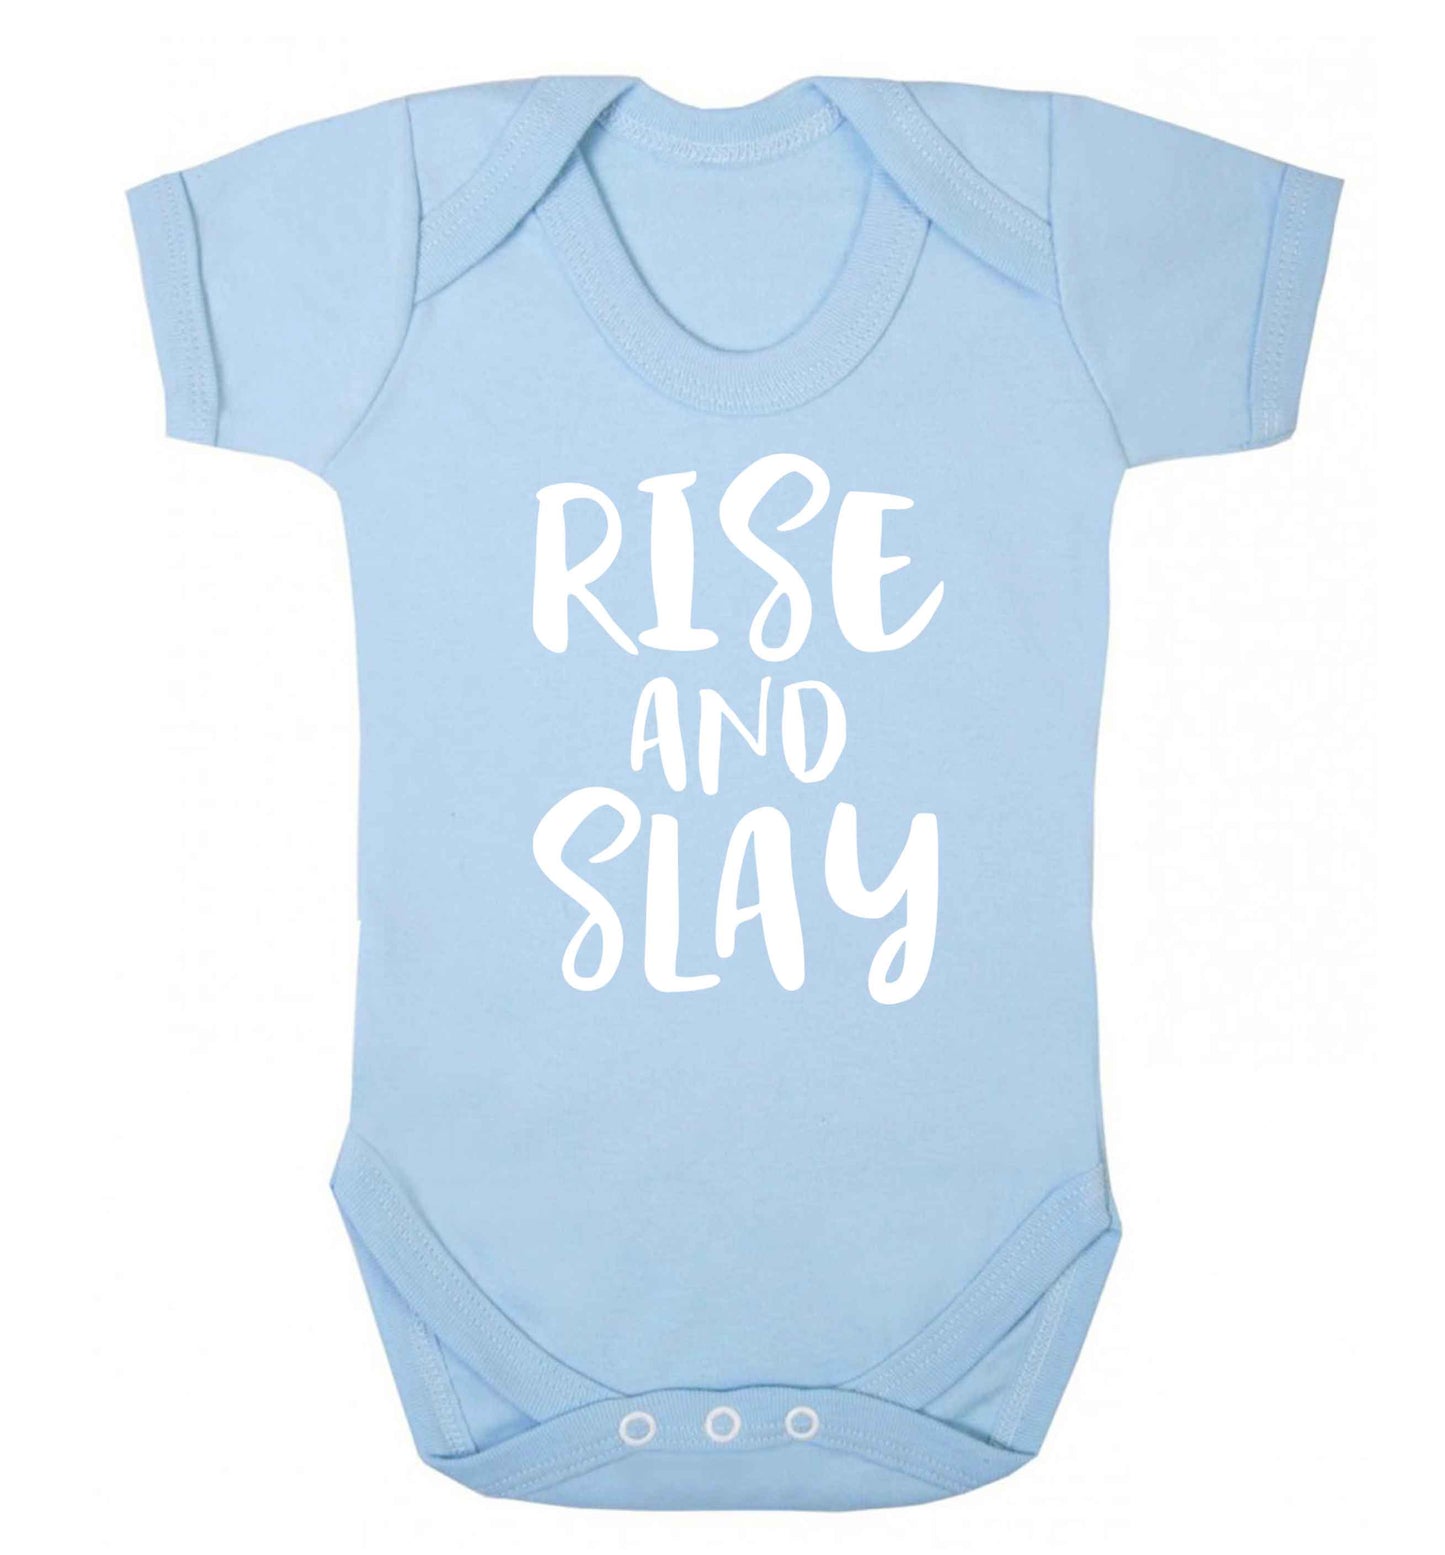 Rise and slay Baby Vest pale blue 18-24 months